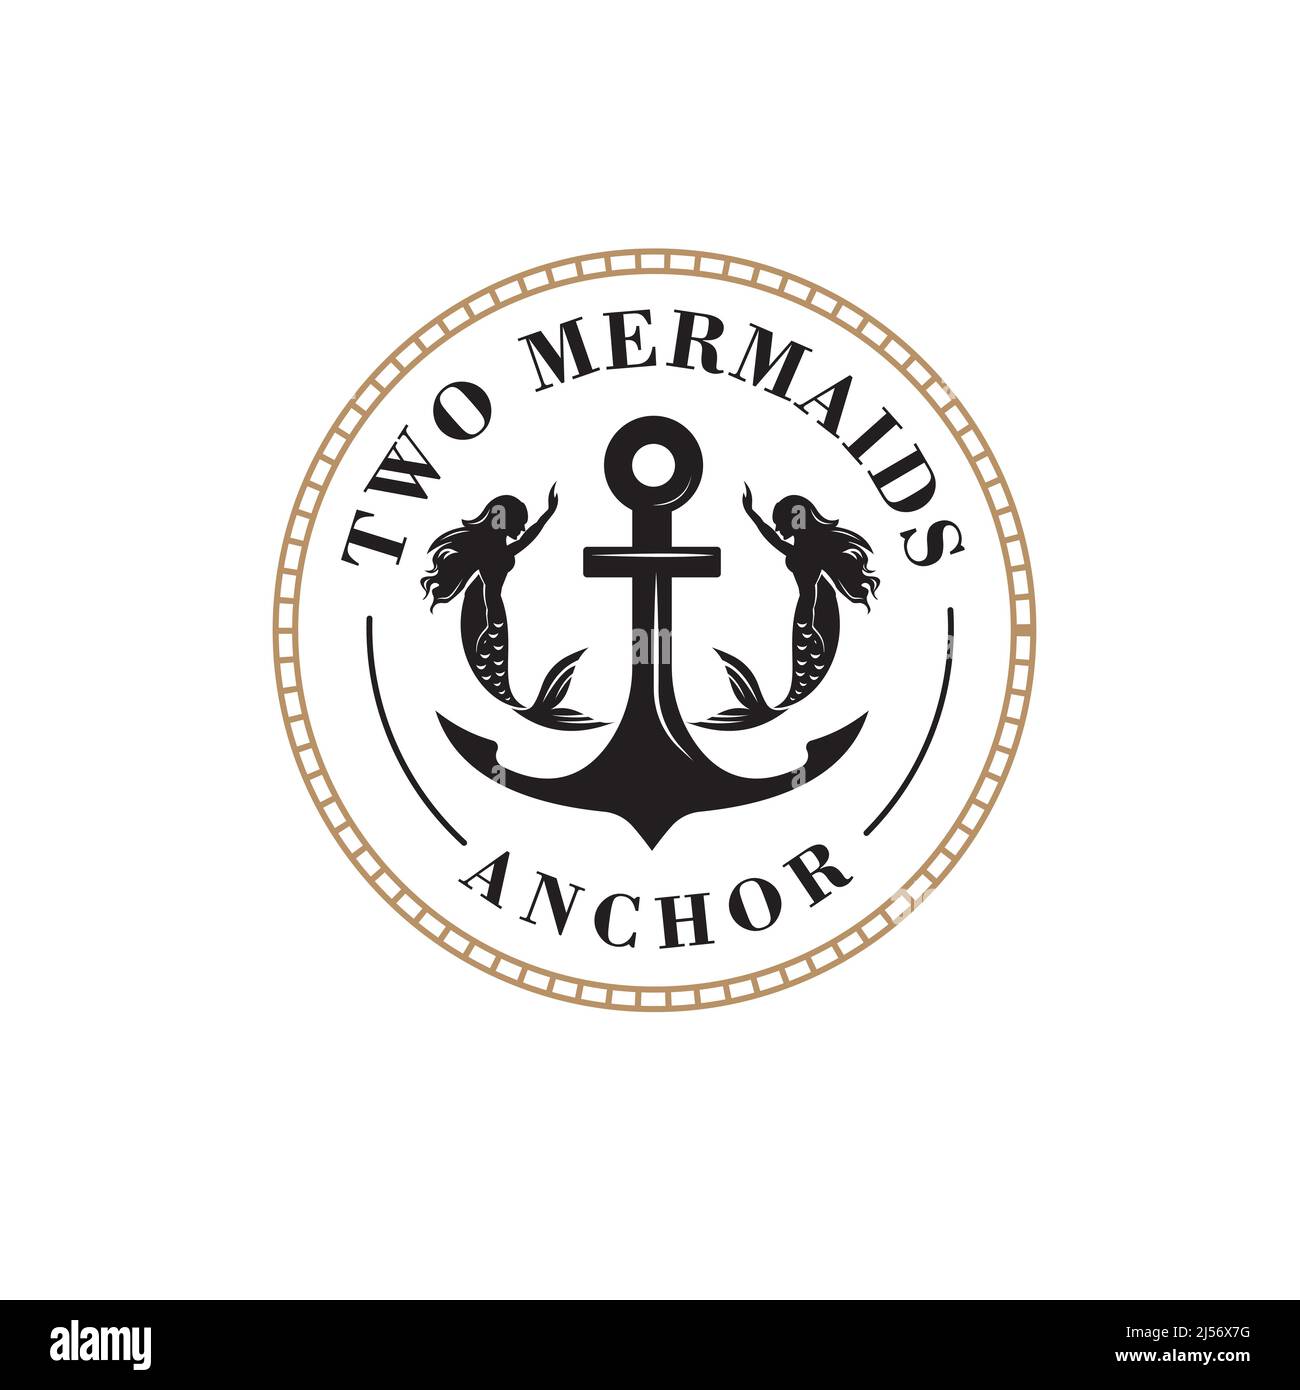 Logo design of two beautiful mermaids with long hair on anchor background in vintage traditional style, frill Stock Vector